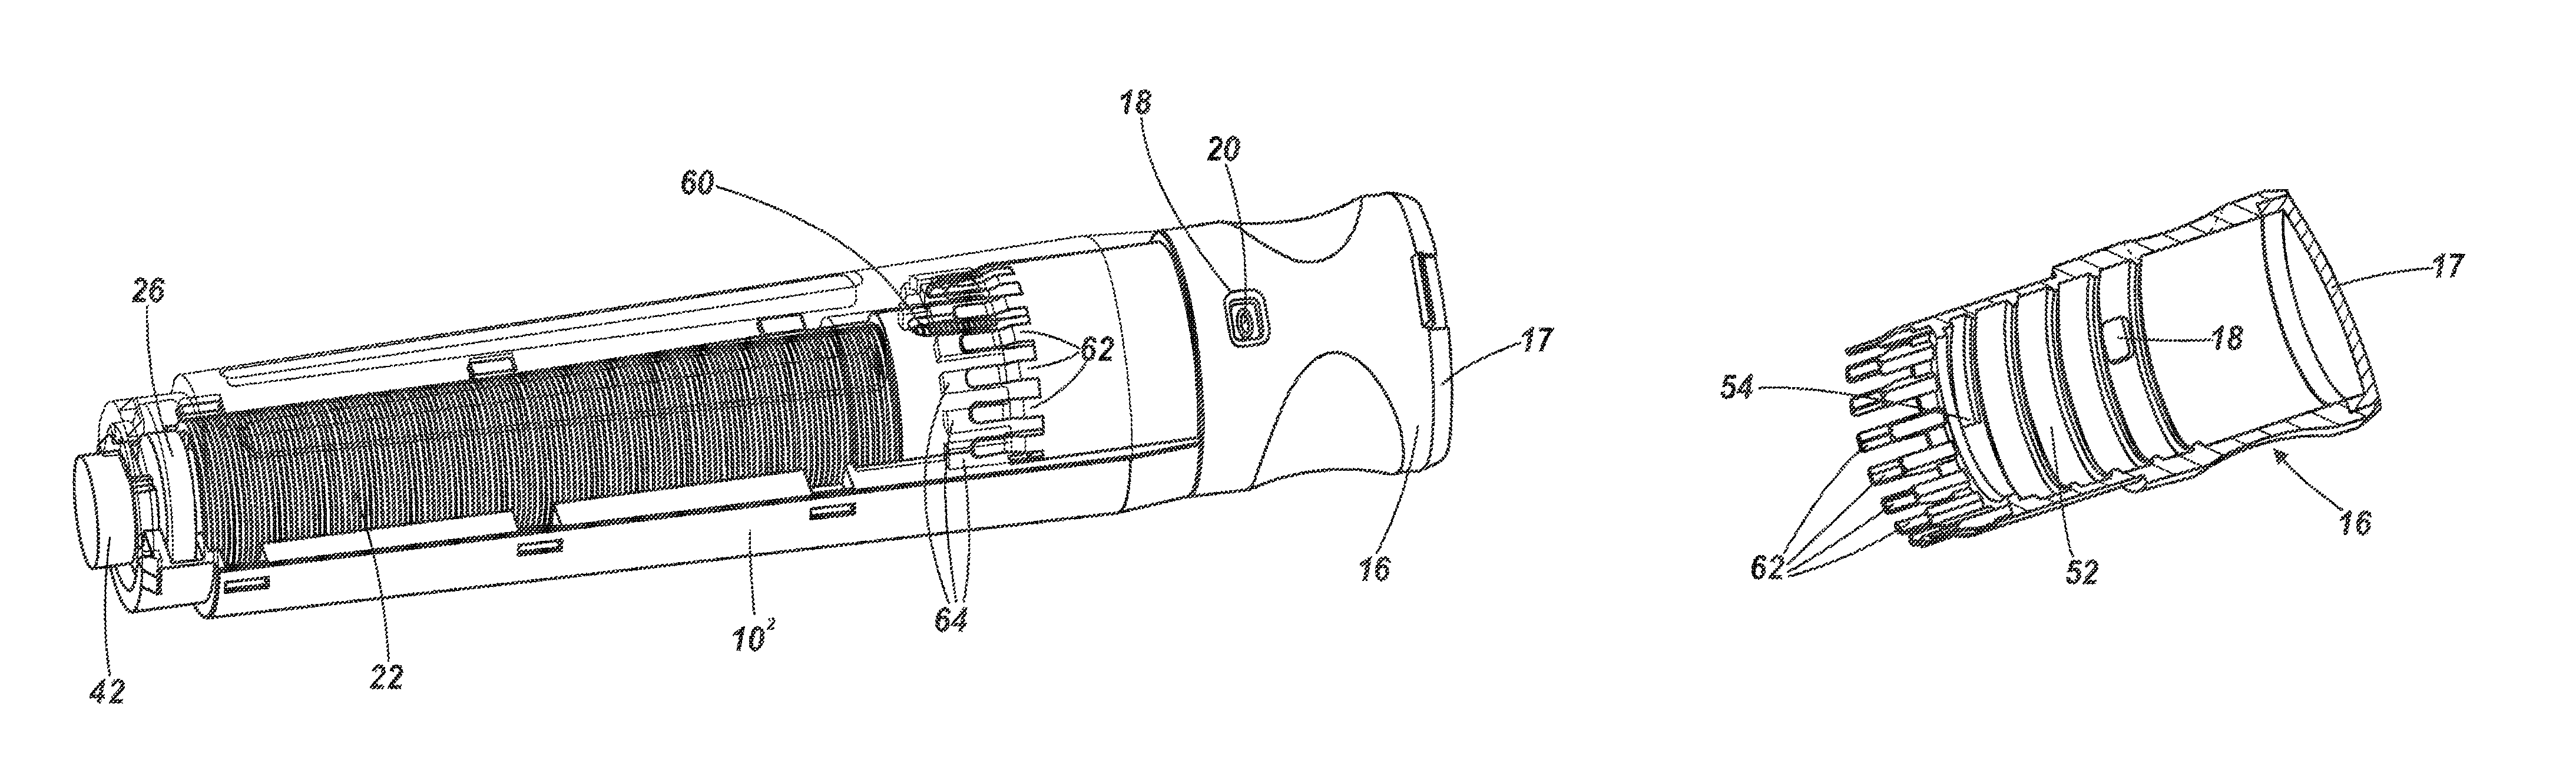 Injector apparatus having a clutch to inhibit forward movement of the plunger